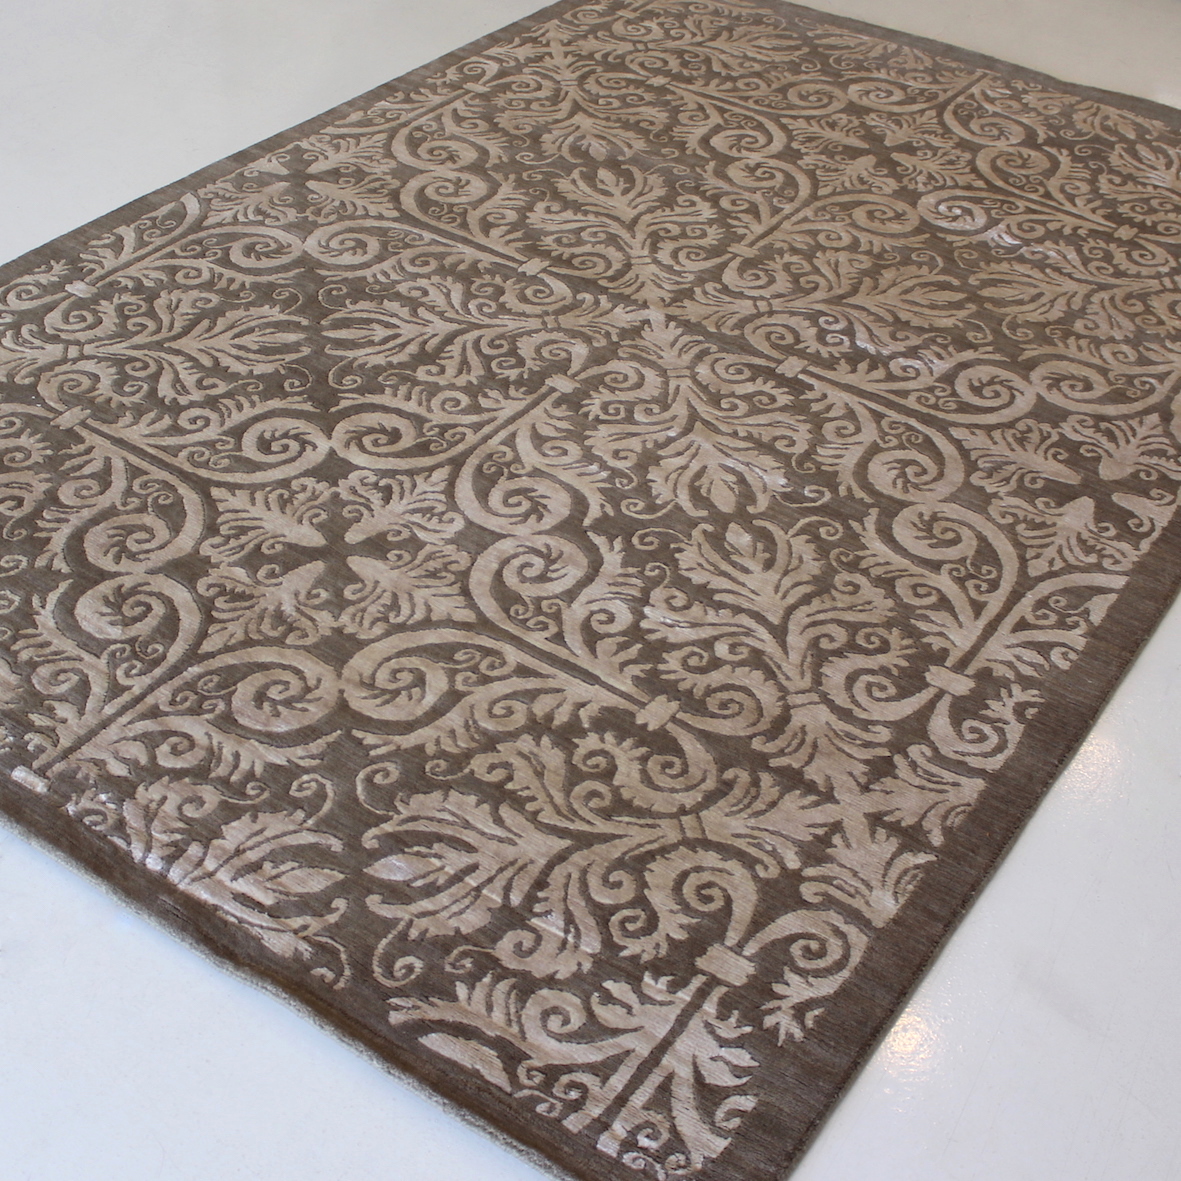 Classic brown rug